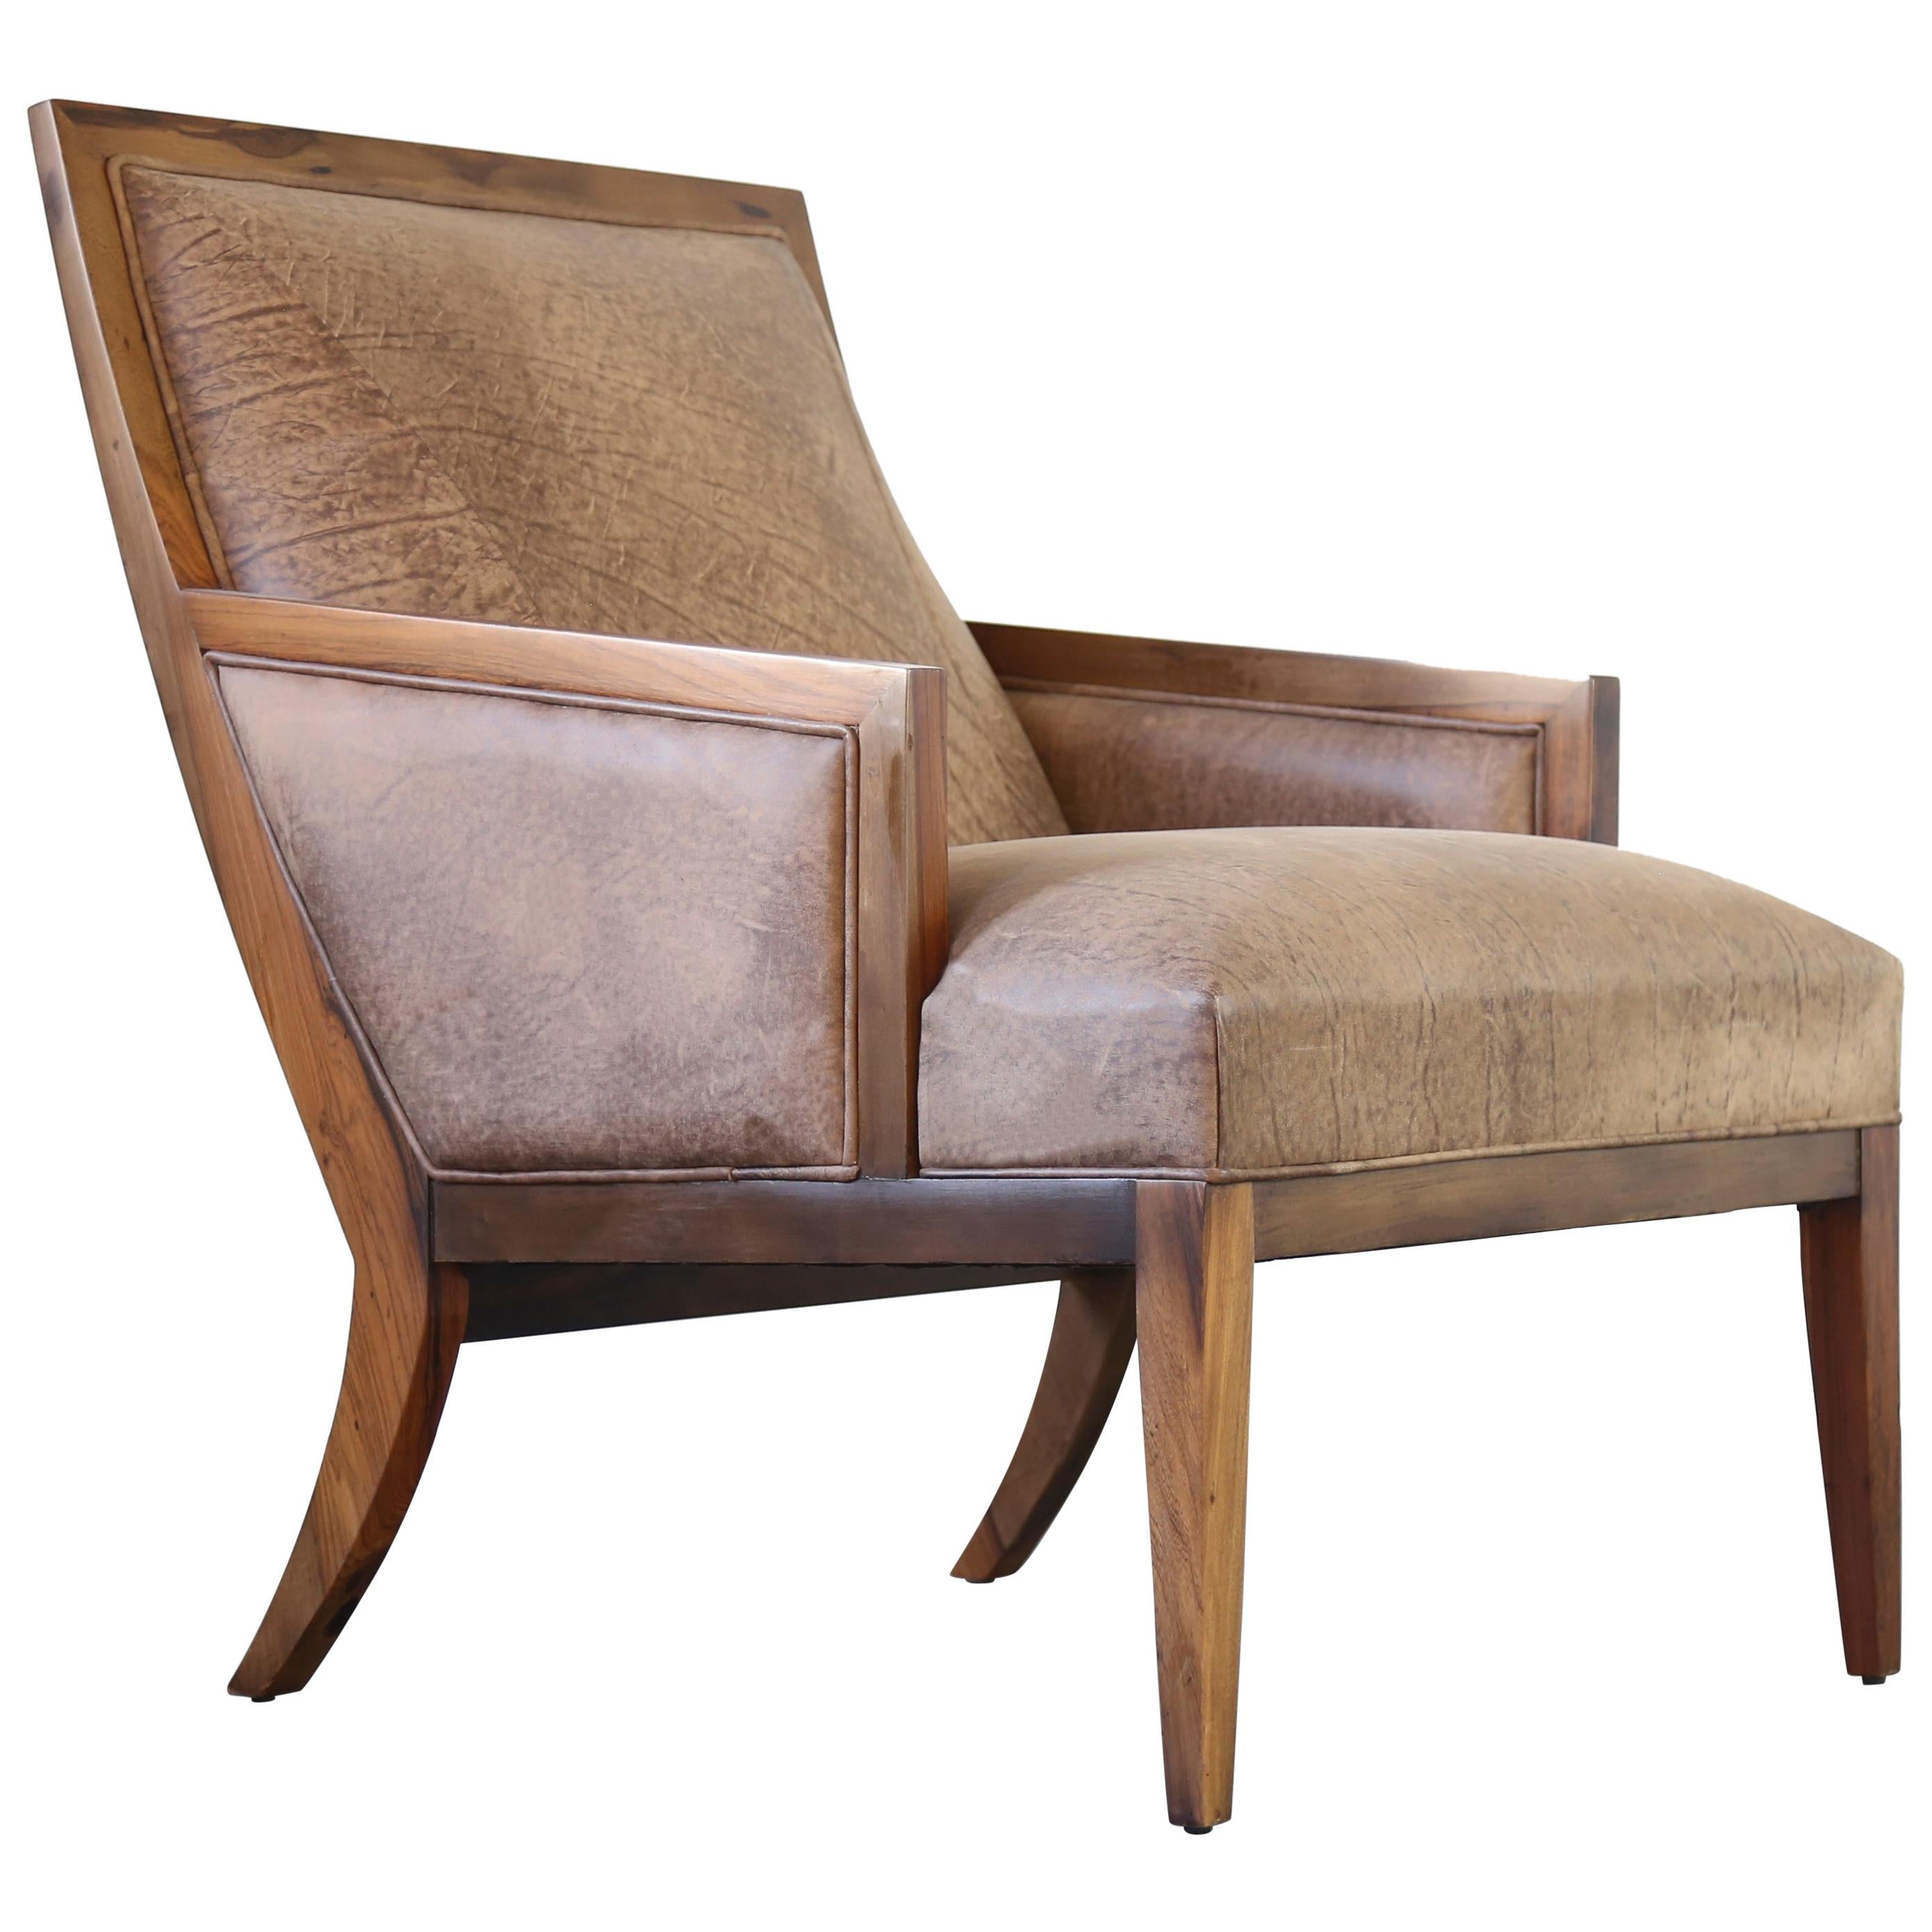 Contemporary Wood and Leather Lounge Chair from Costantini, Belgrano For Sale